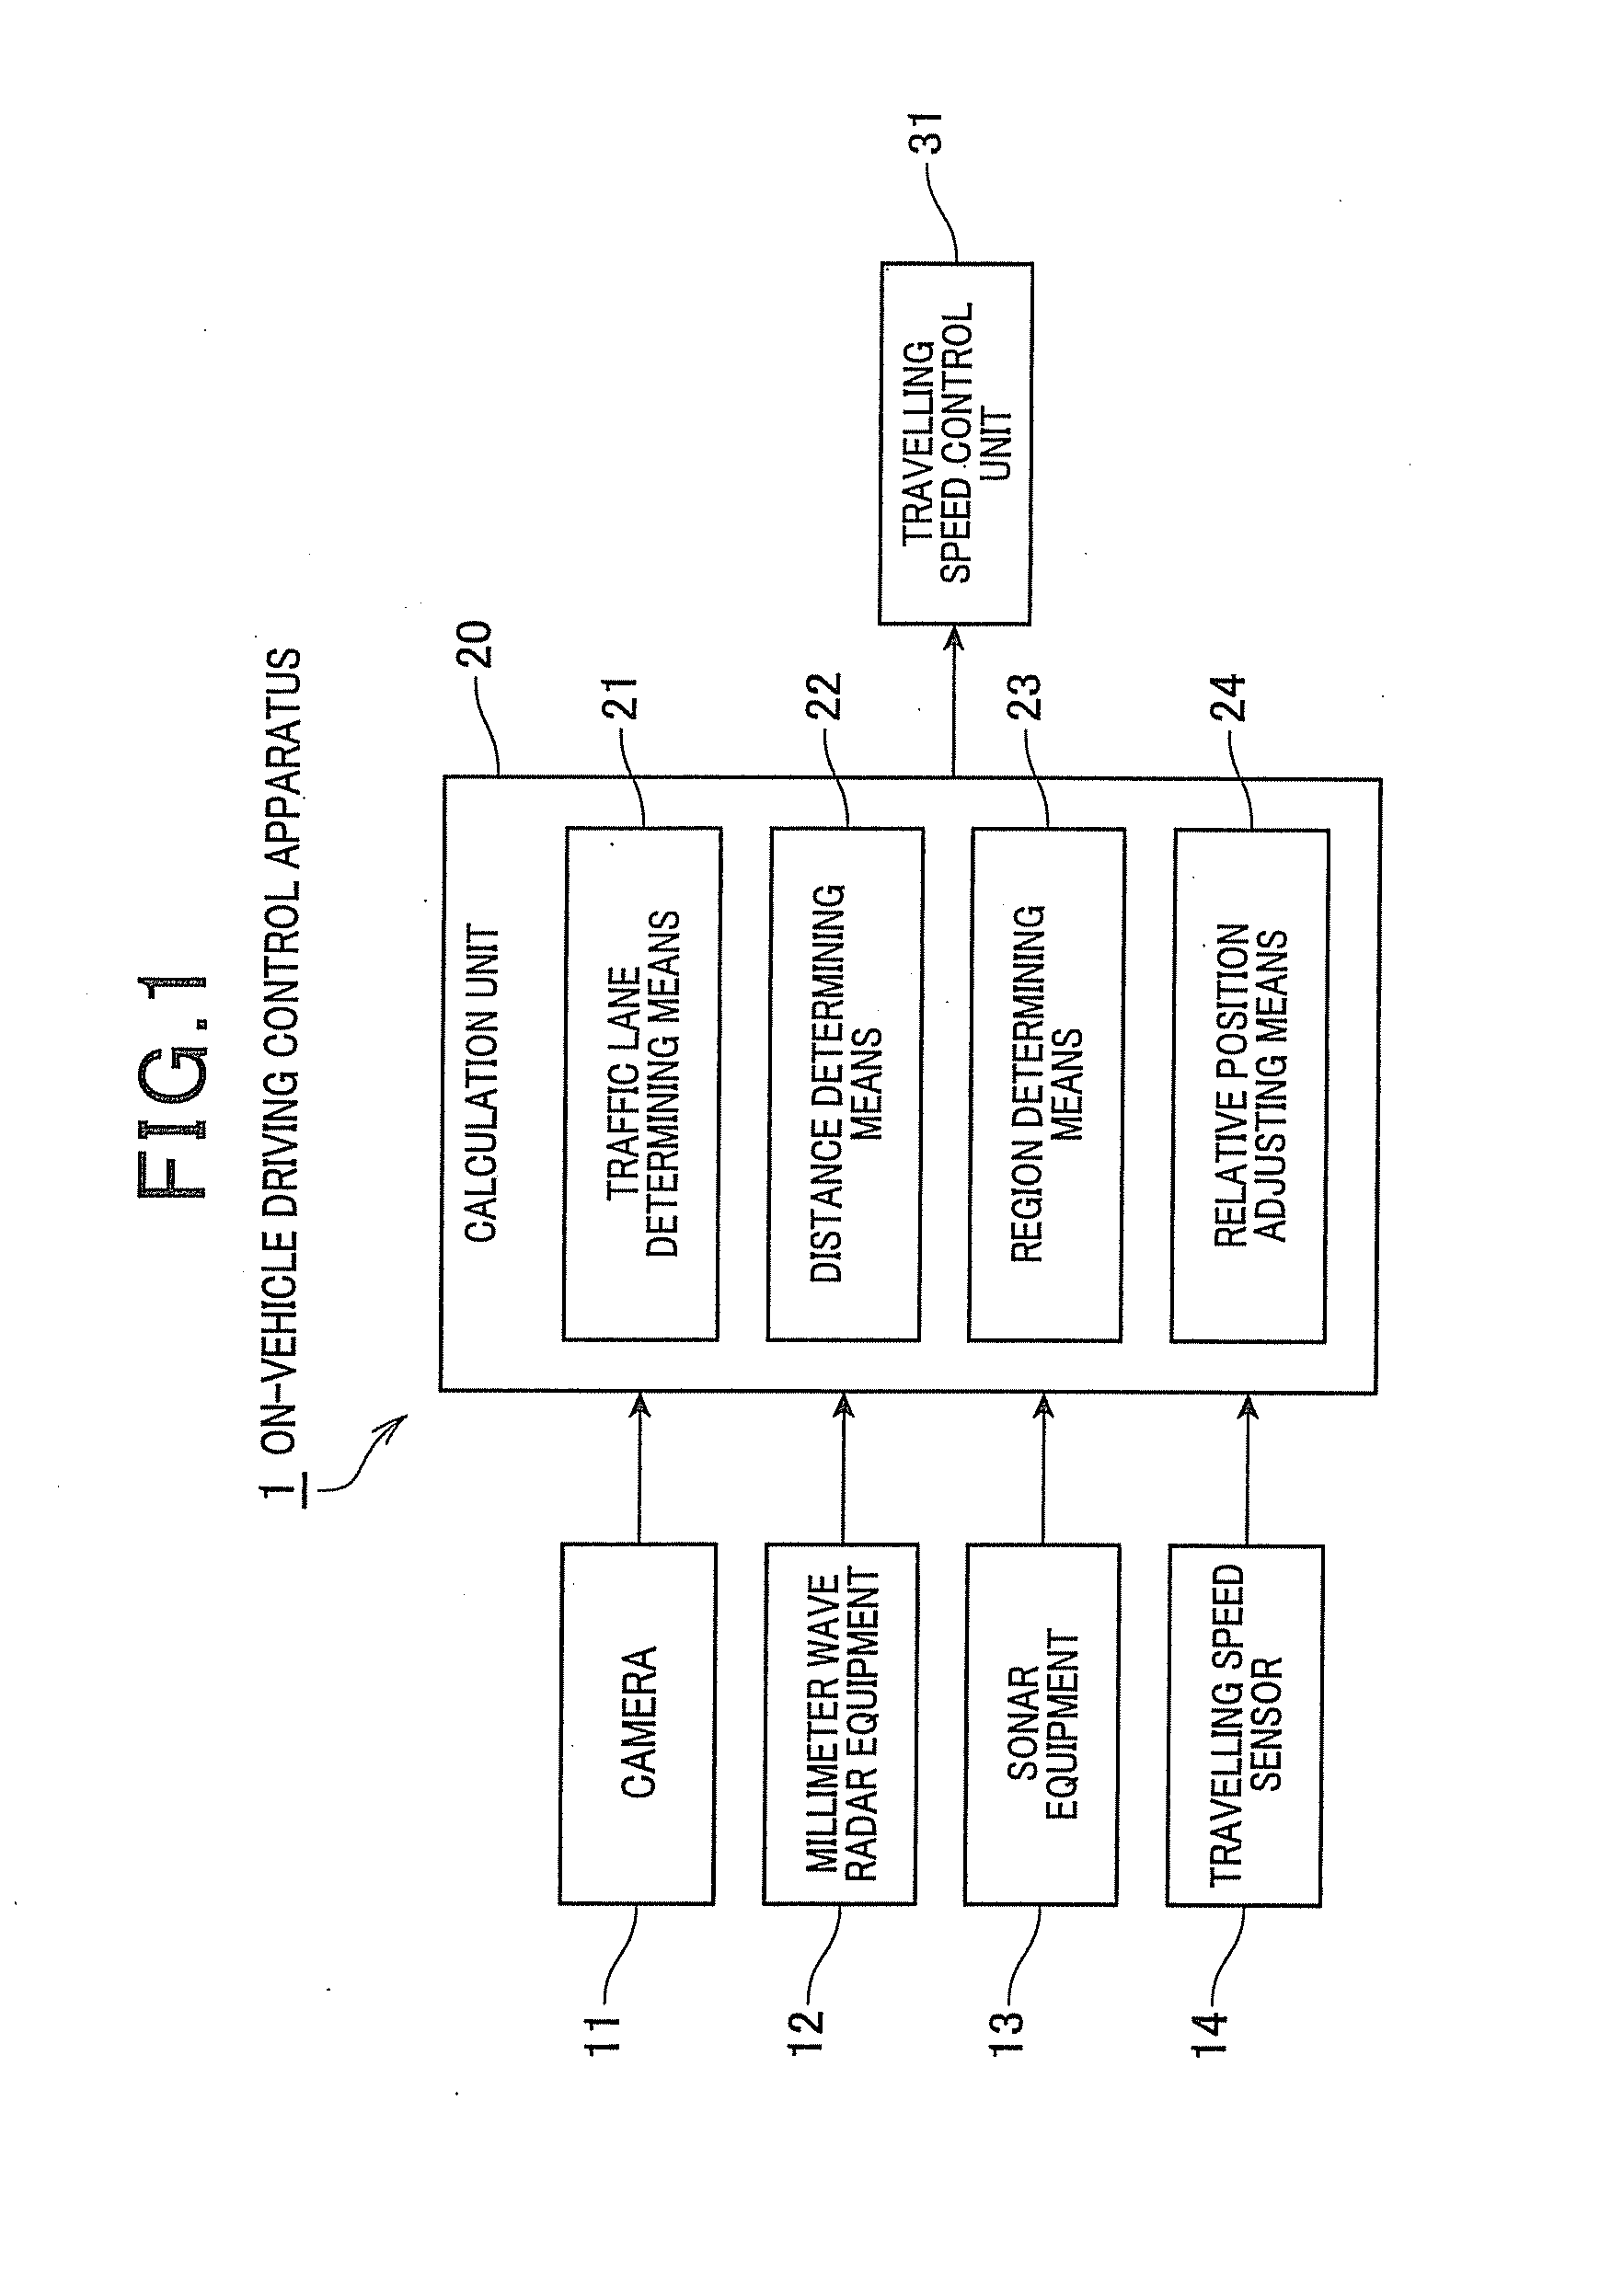 Driving control apparatus mounted on vehicle to avoid collision with preceding vehicle